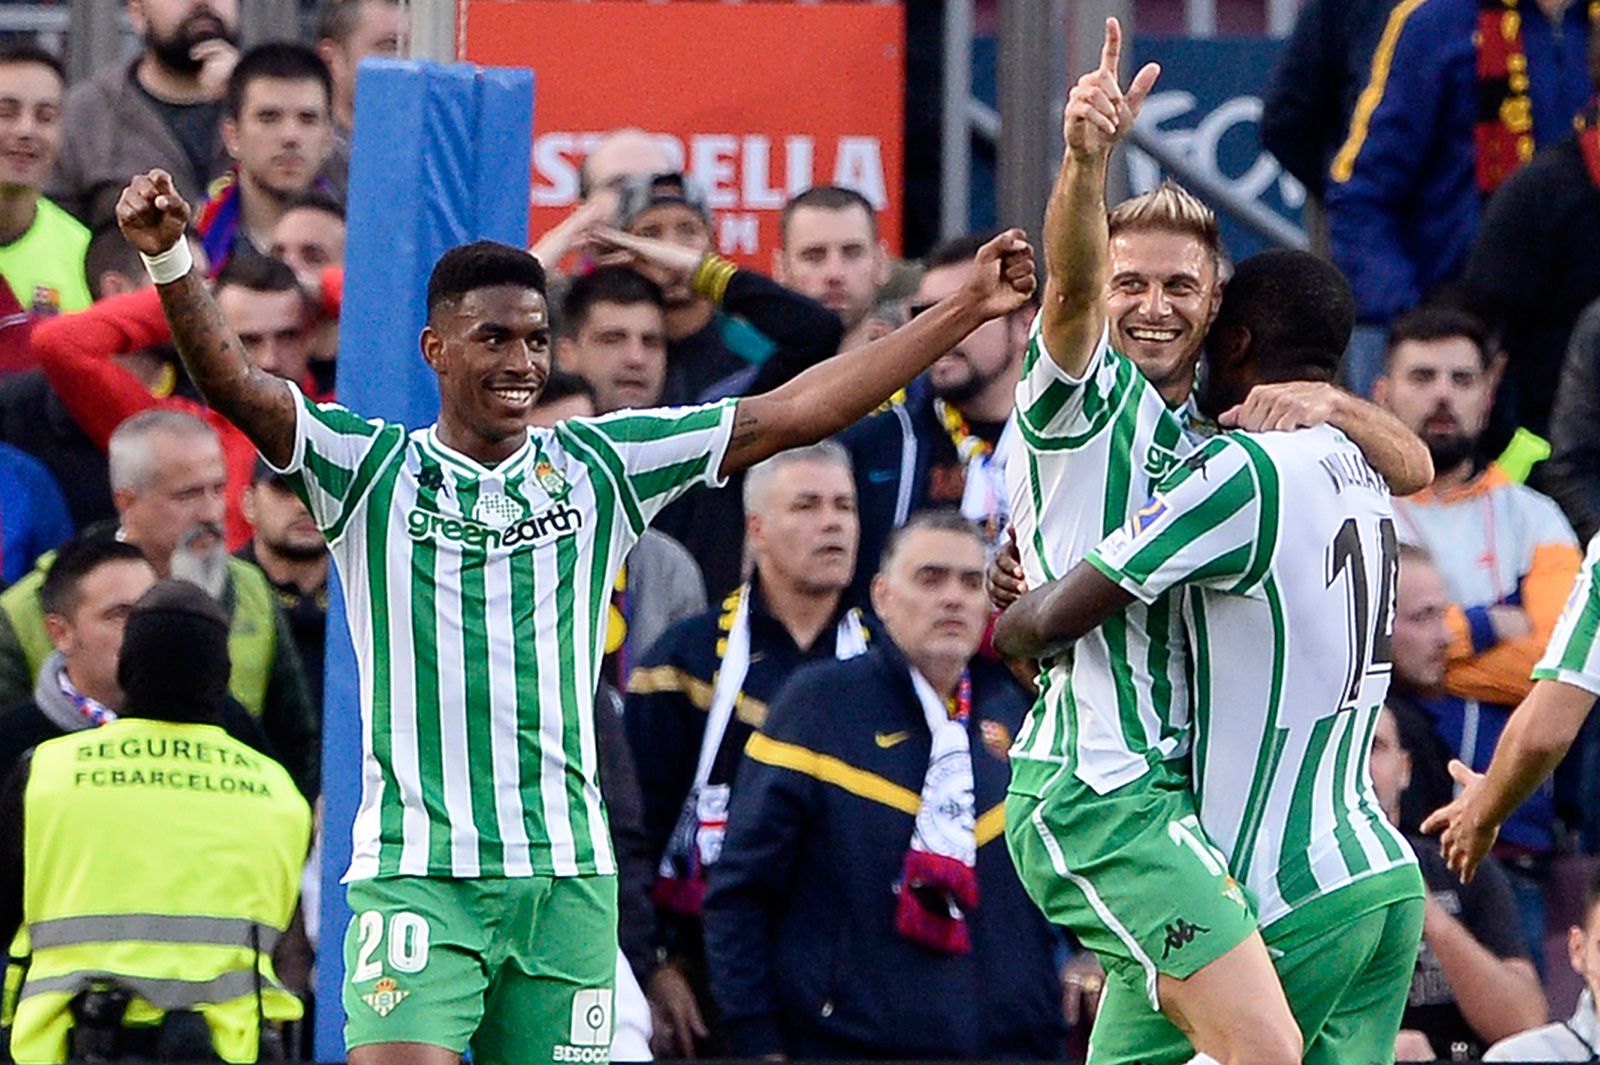 The Betis celebrates the goal of Junior in the Camp Nou